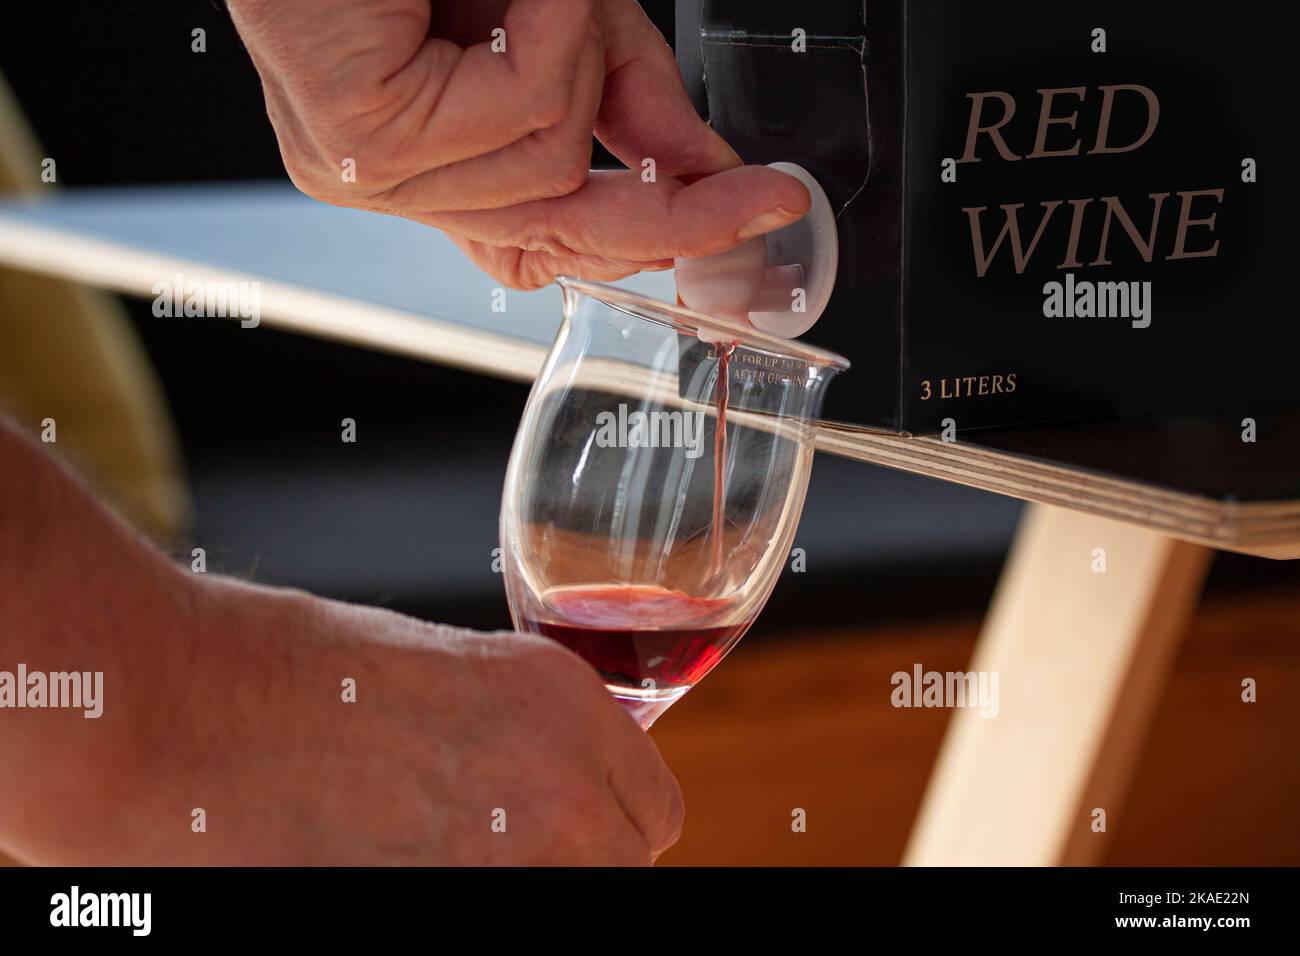 Hand pouring red wine into a glass from a BIB - cardboard bag in box with open tap standing on a table. Close up image. Fictitious brand. Stock Photo